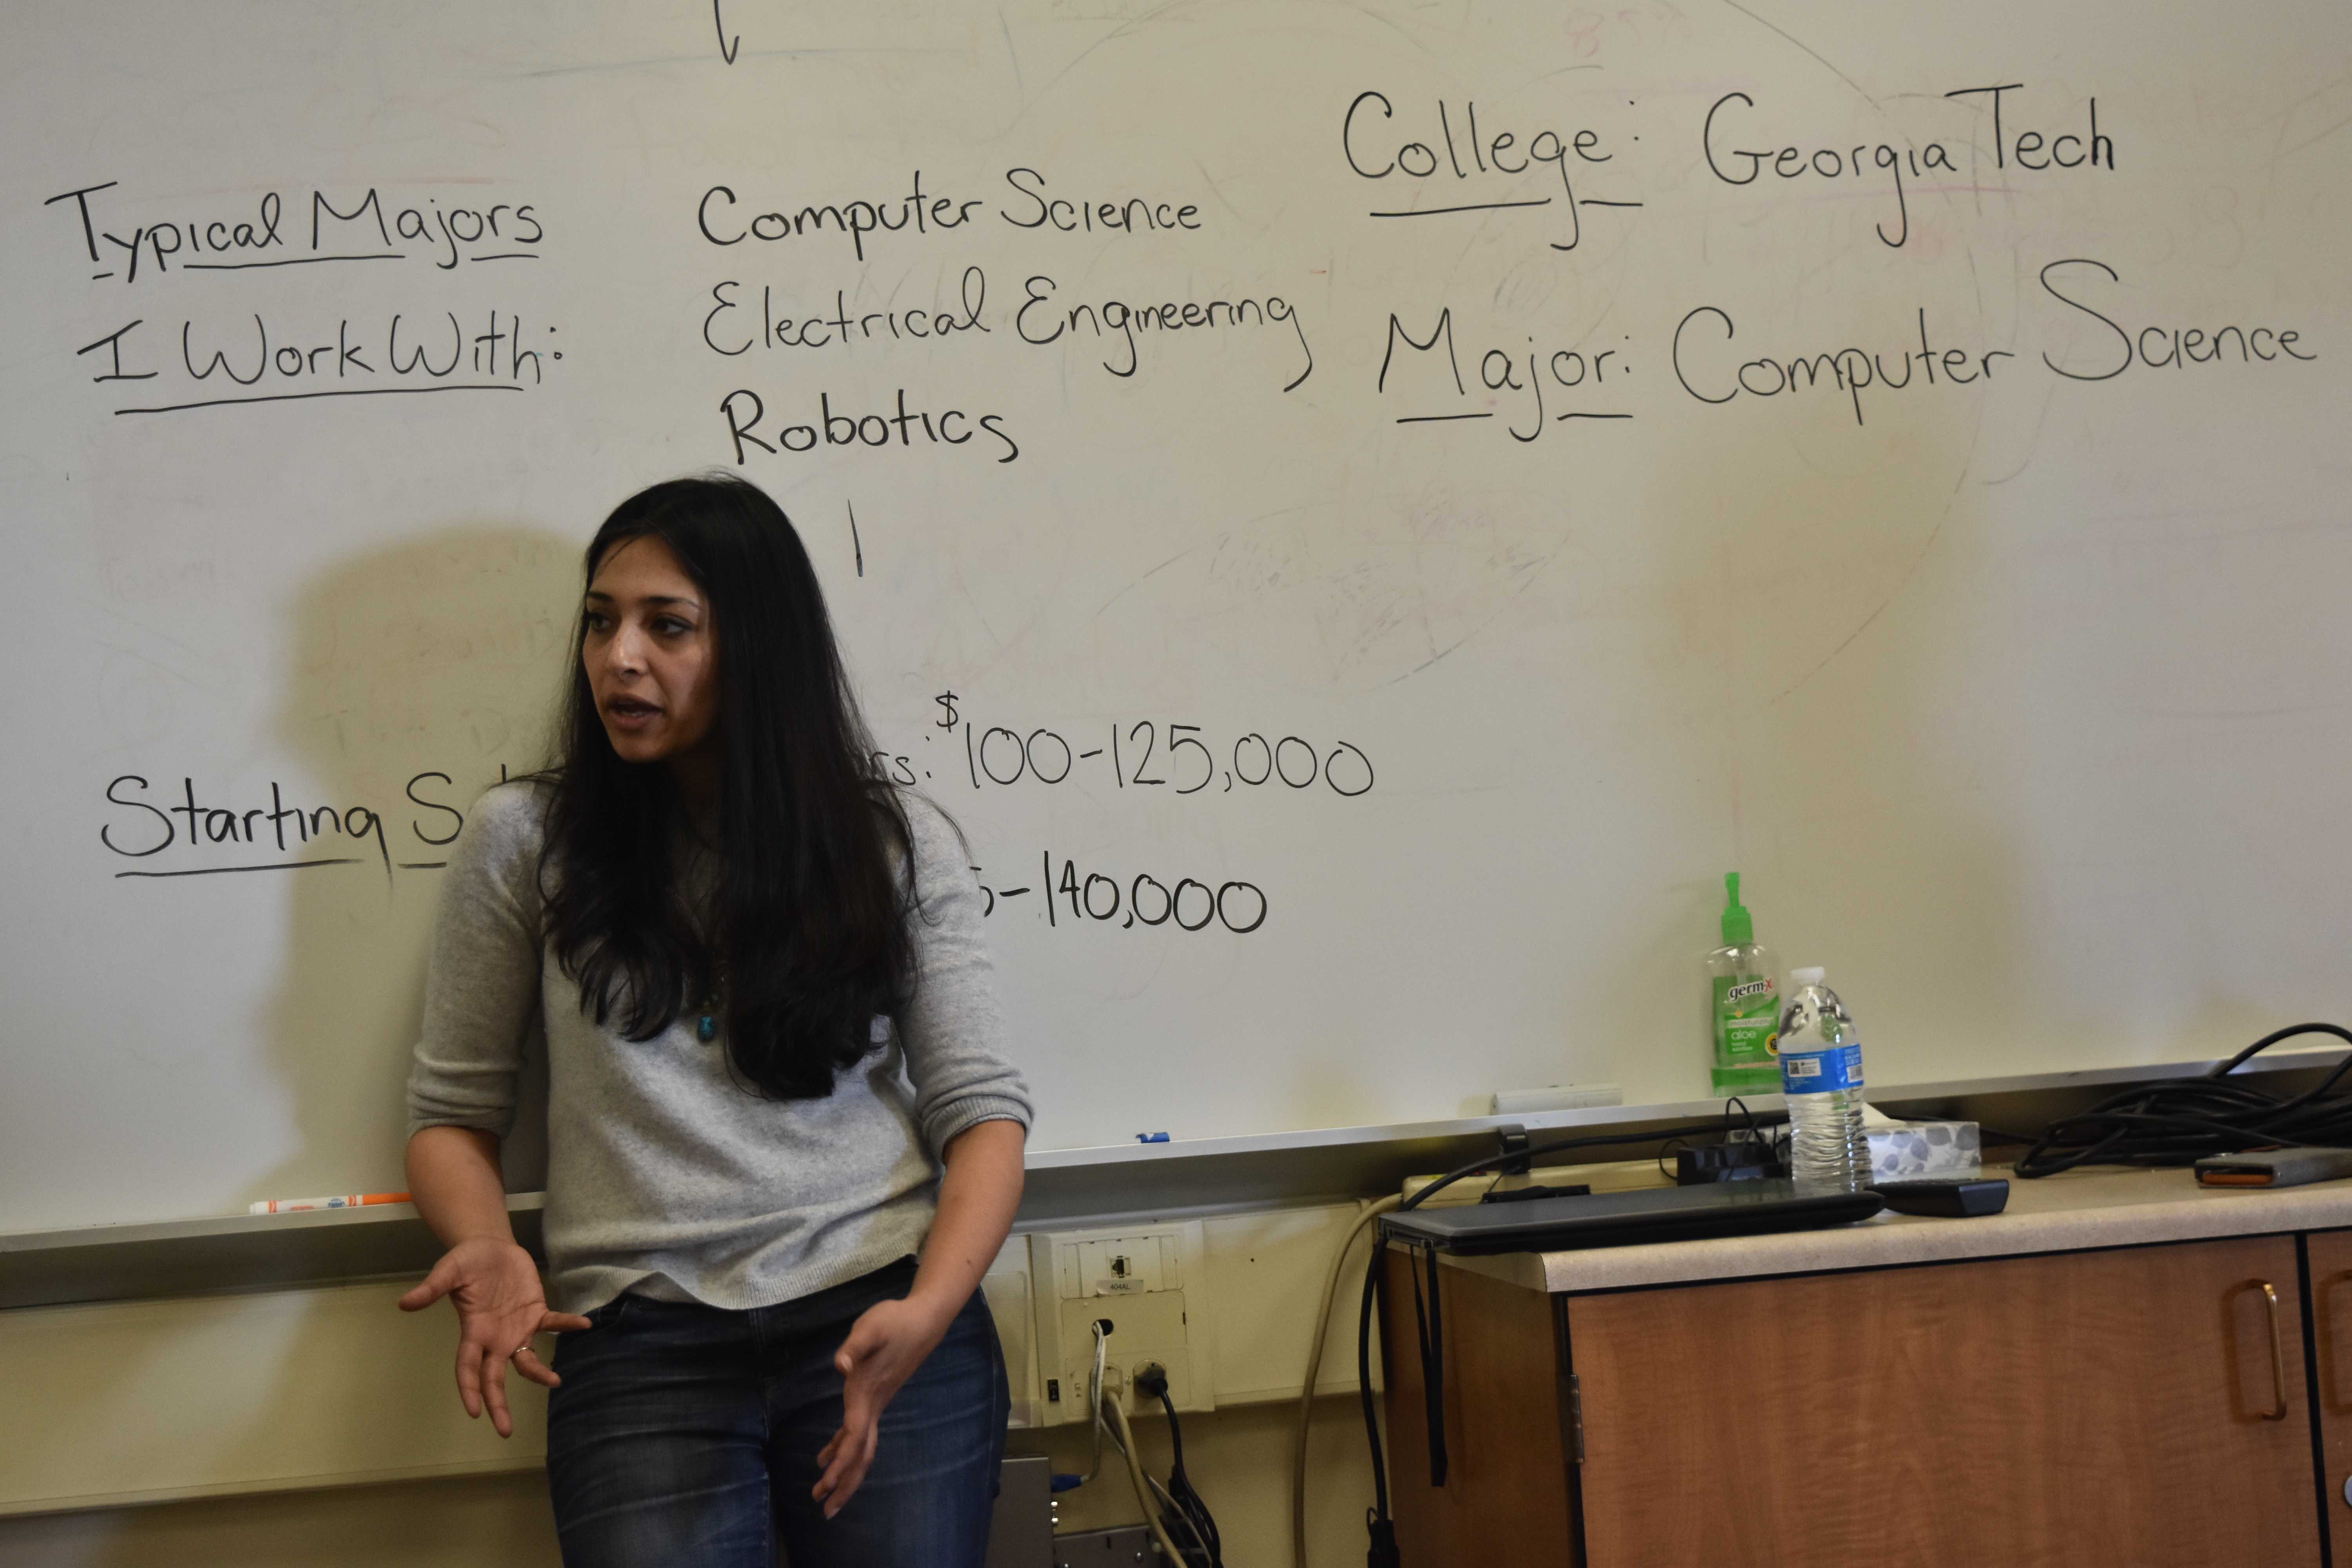 Sarah Tariq, a research for the development of self-driving cars at Zoox, explains about her career journey to Palo Alto High School students on Day 3 of Career month. Tariq, who initially thought that she would pursue a career in medicine during her high school education, transitioned into the recently-emerging machine learning field. “Everyone’s career path is going to be different and there doesn’t need to be clarity on what you are doing 10 years from now,” Tariq said. “What’s important is finding what motivates you.” Photo: Eric Yap 